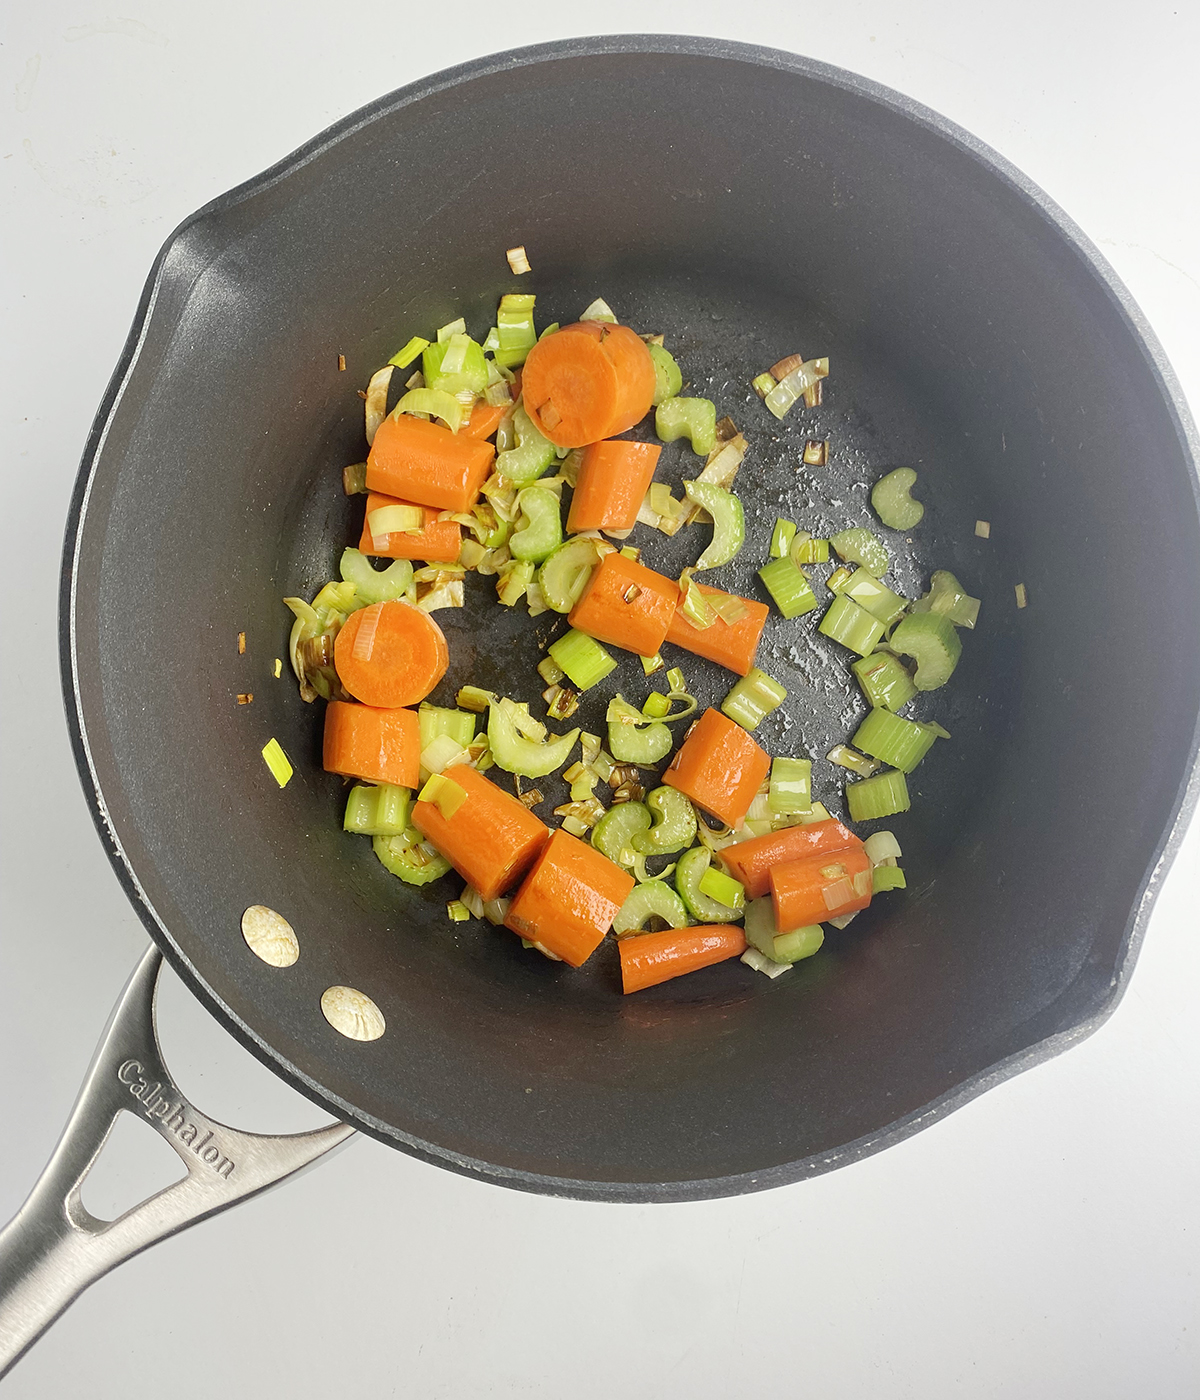 Sauteed carrots, leeks and celery in a pot.